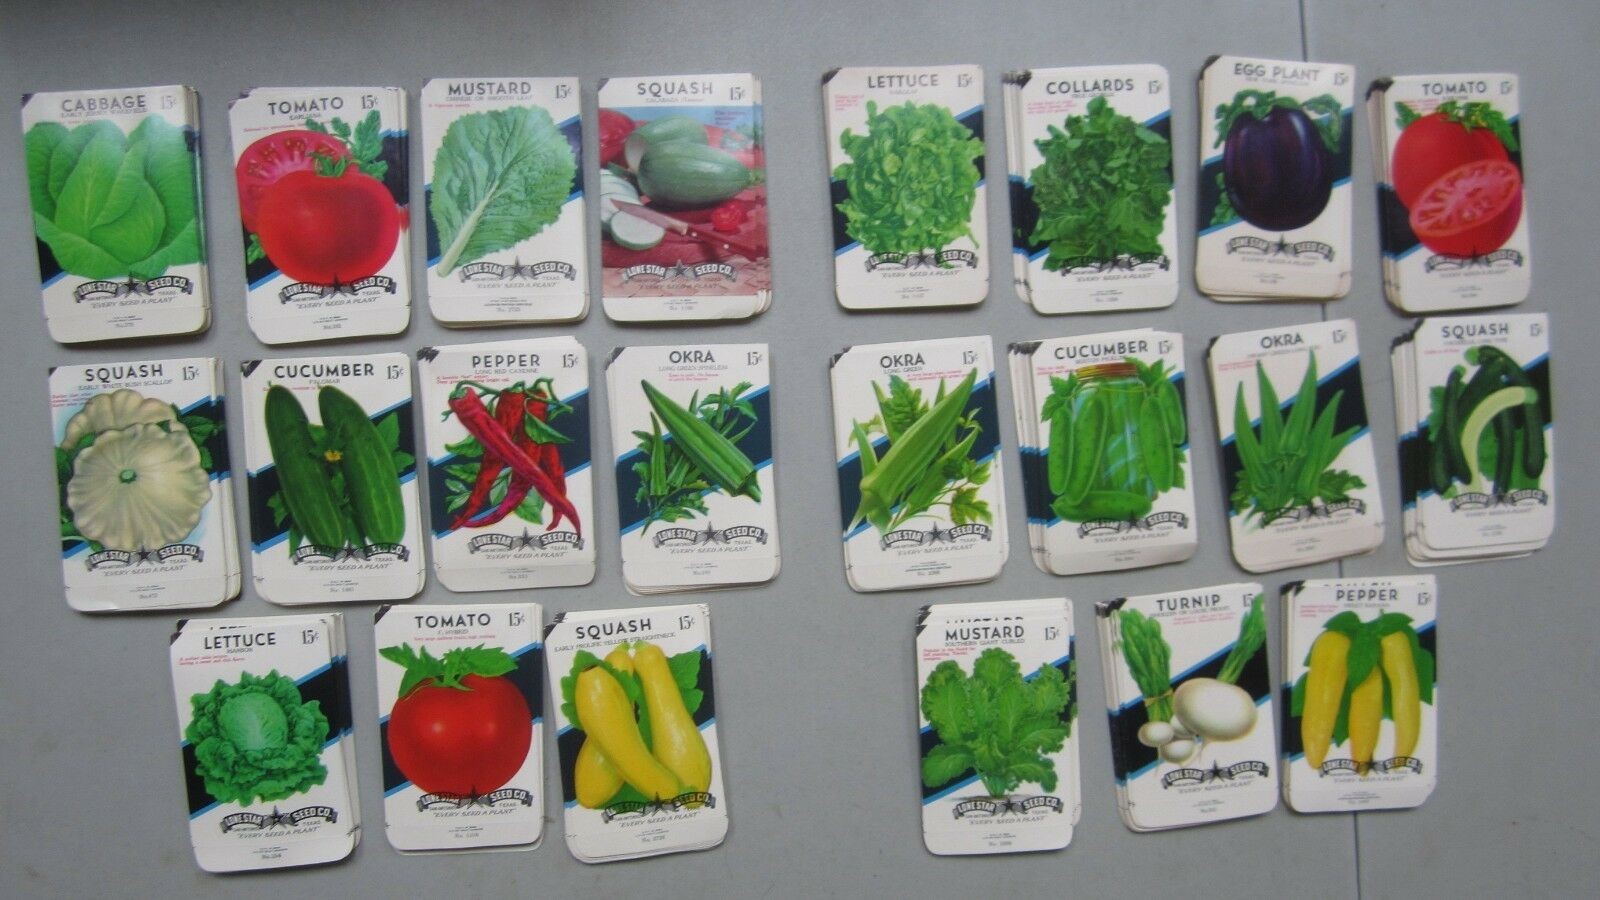  Lot of 550 Old Vintage Vegetable SEED PACKETS ...